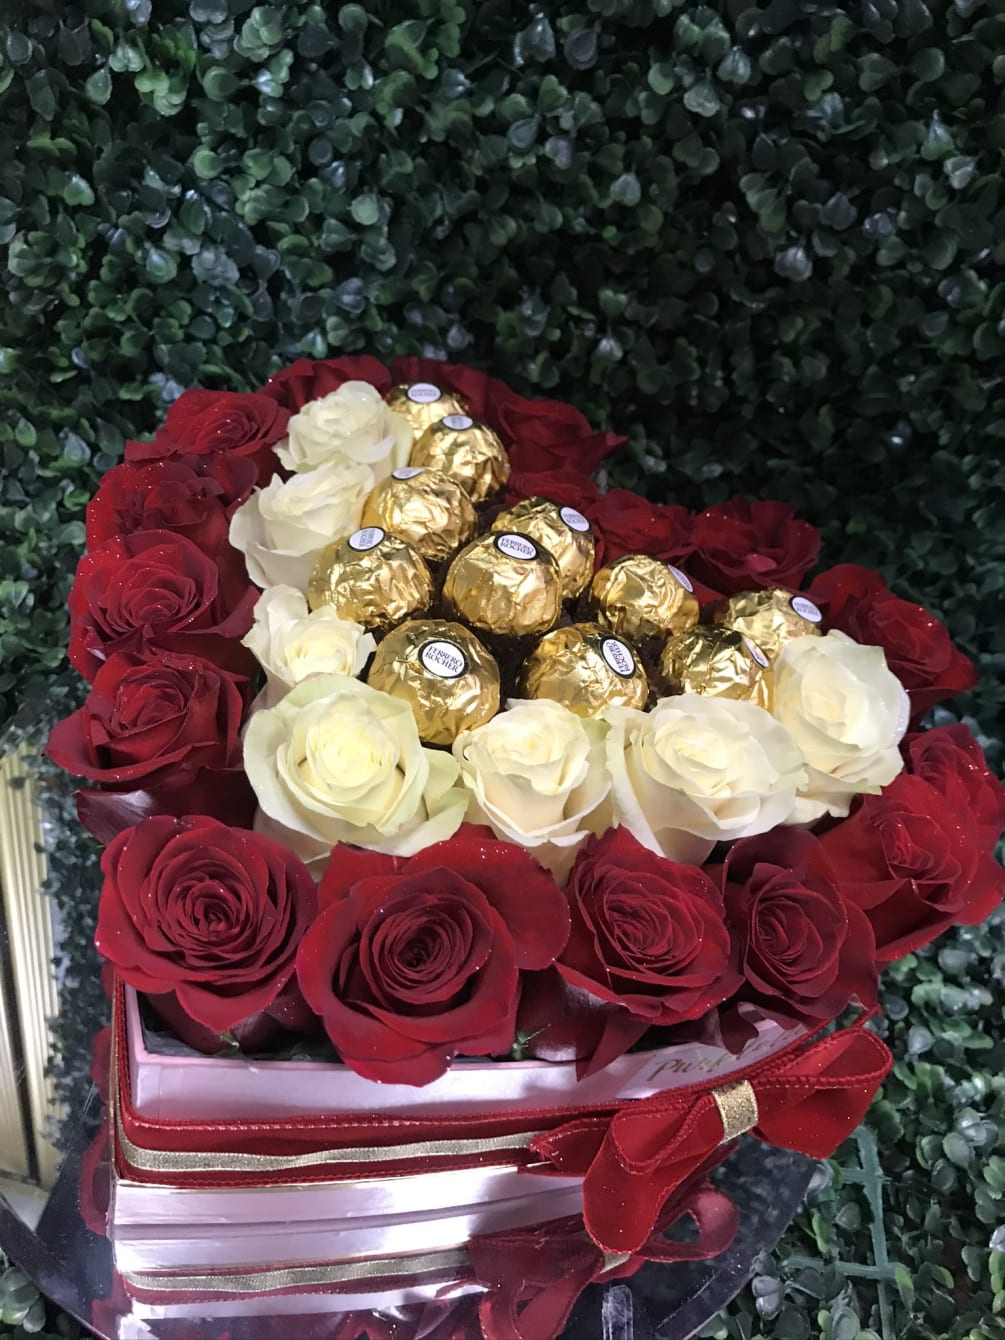 Red and white roses arranged in a heart shaped box complemented with